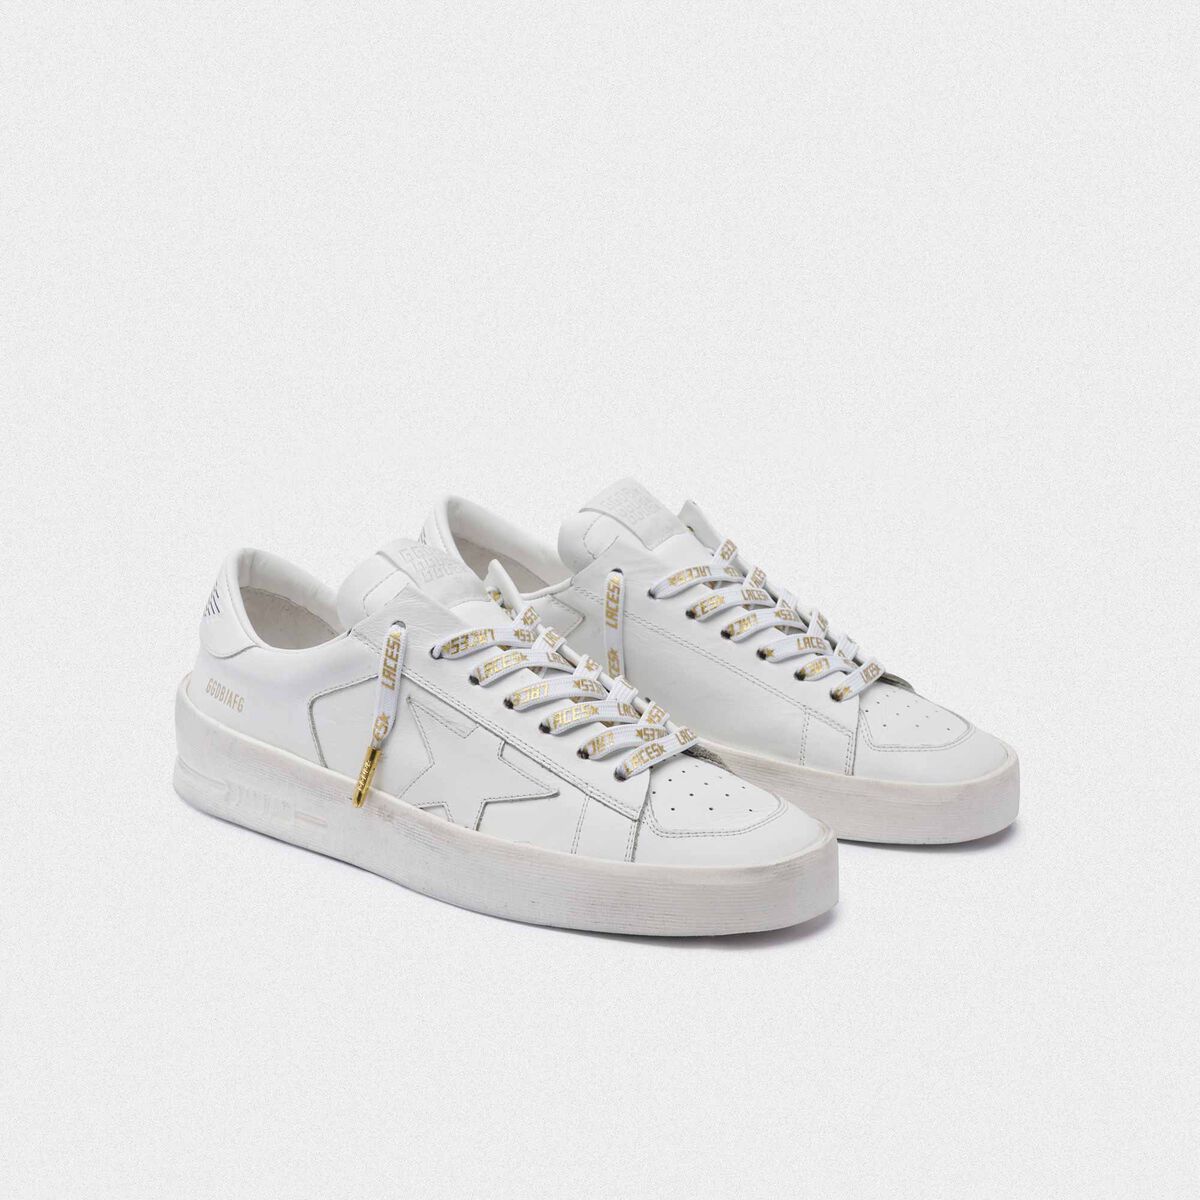 Laces Women's white laces with gold laces print | Golden Goose Deluxe Brand